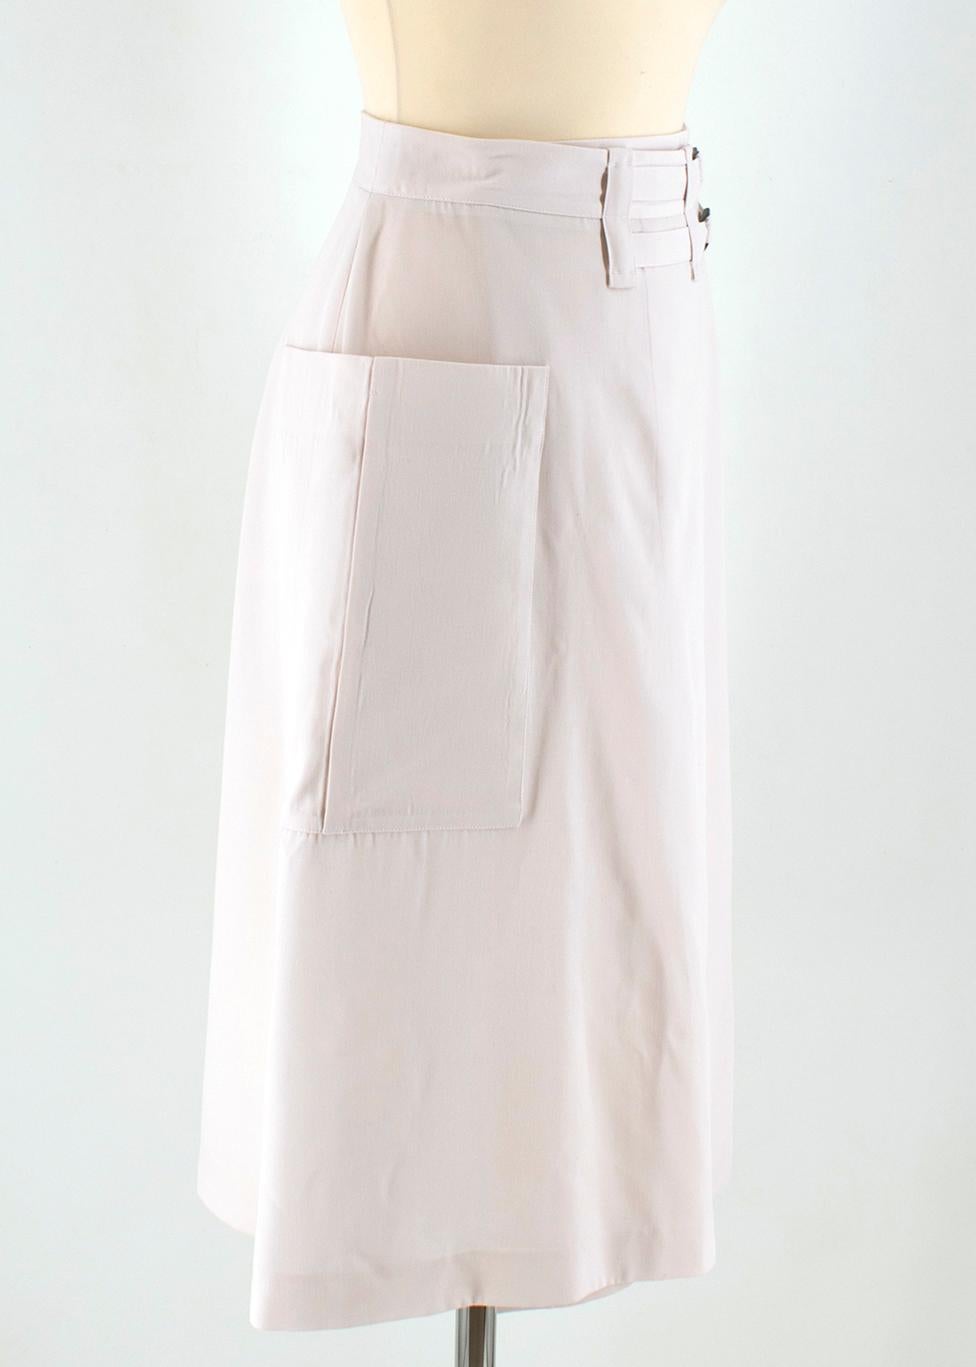 Bottega Veneta Wool Wrap Midi Skirt

- beige wool wrap skirt 
- lined
- button and double buckle fastening to the waist 
- midi length
- slip pocket embellishment to the side

Please note, these items are pre-owned and may show some signs of